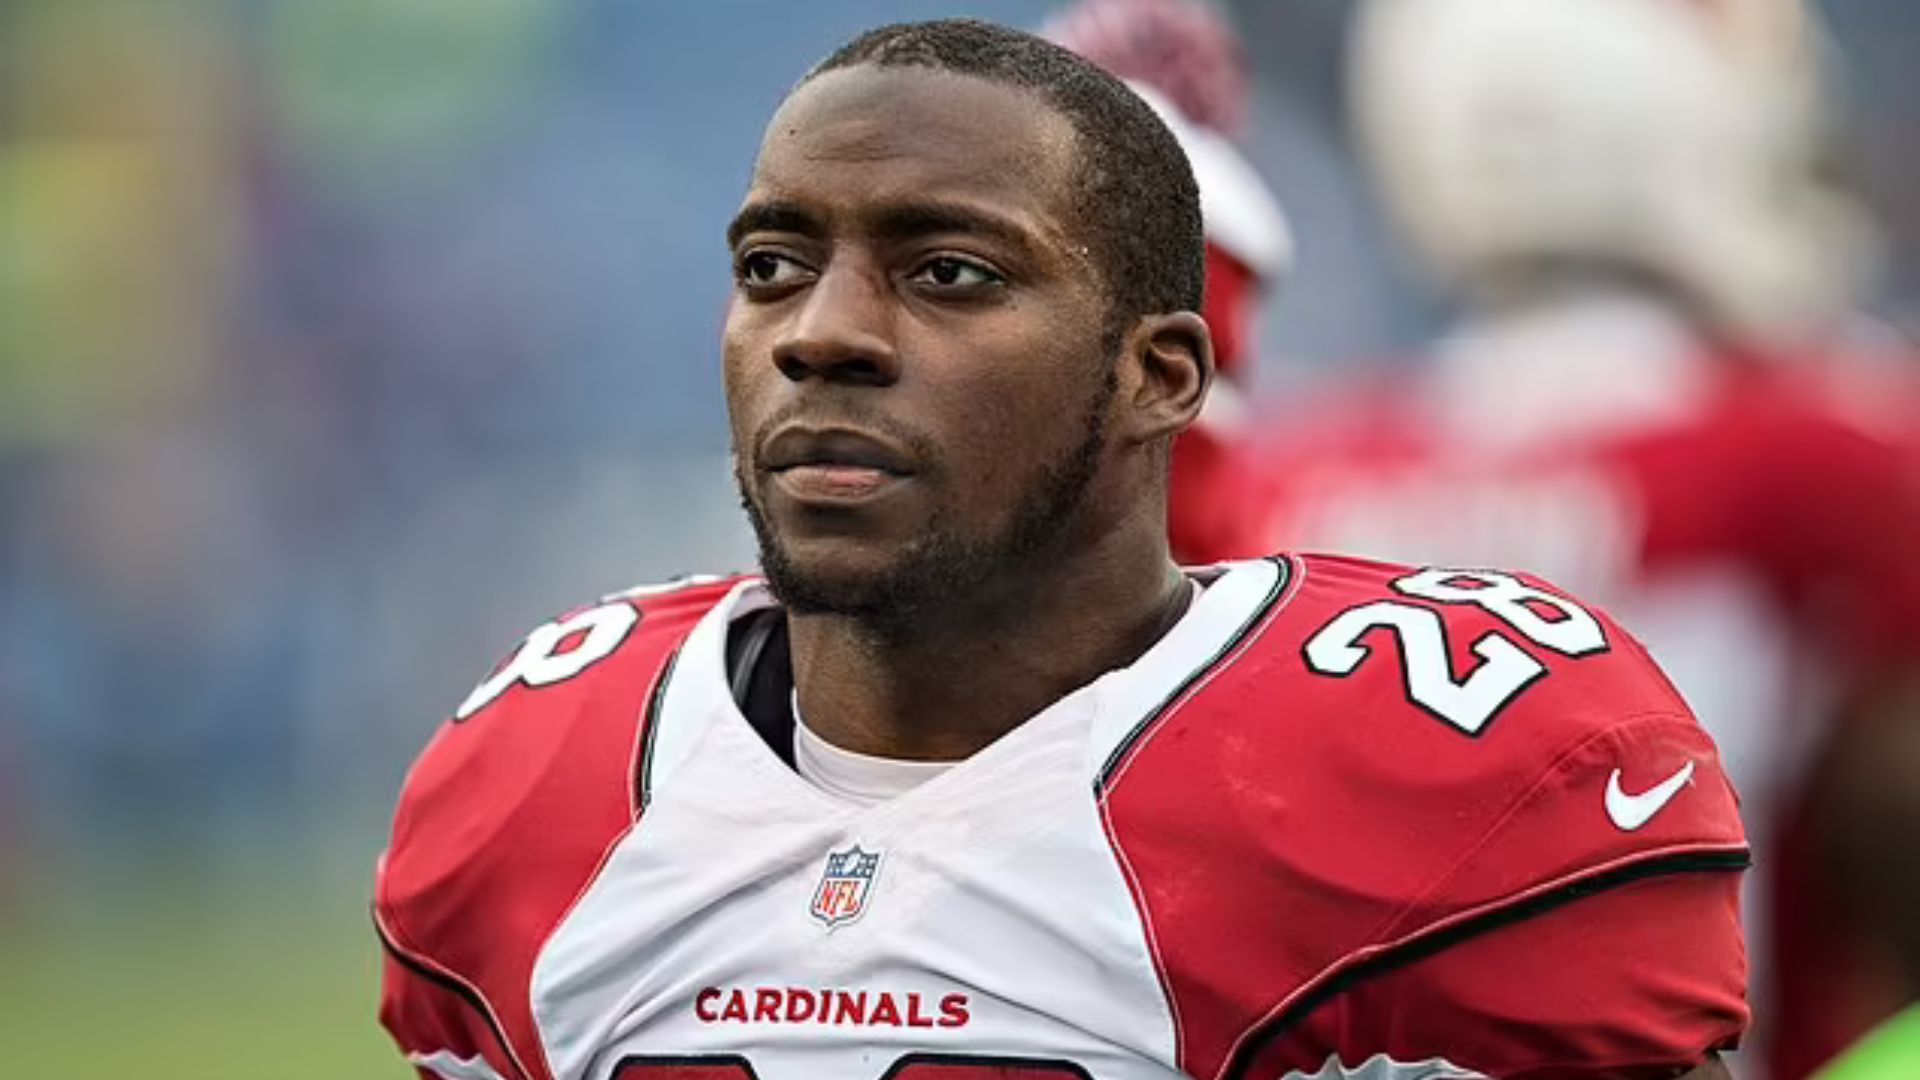 Rashard Mendenhall's Wife: He Plays Victim After Anti-White Comments